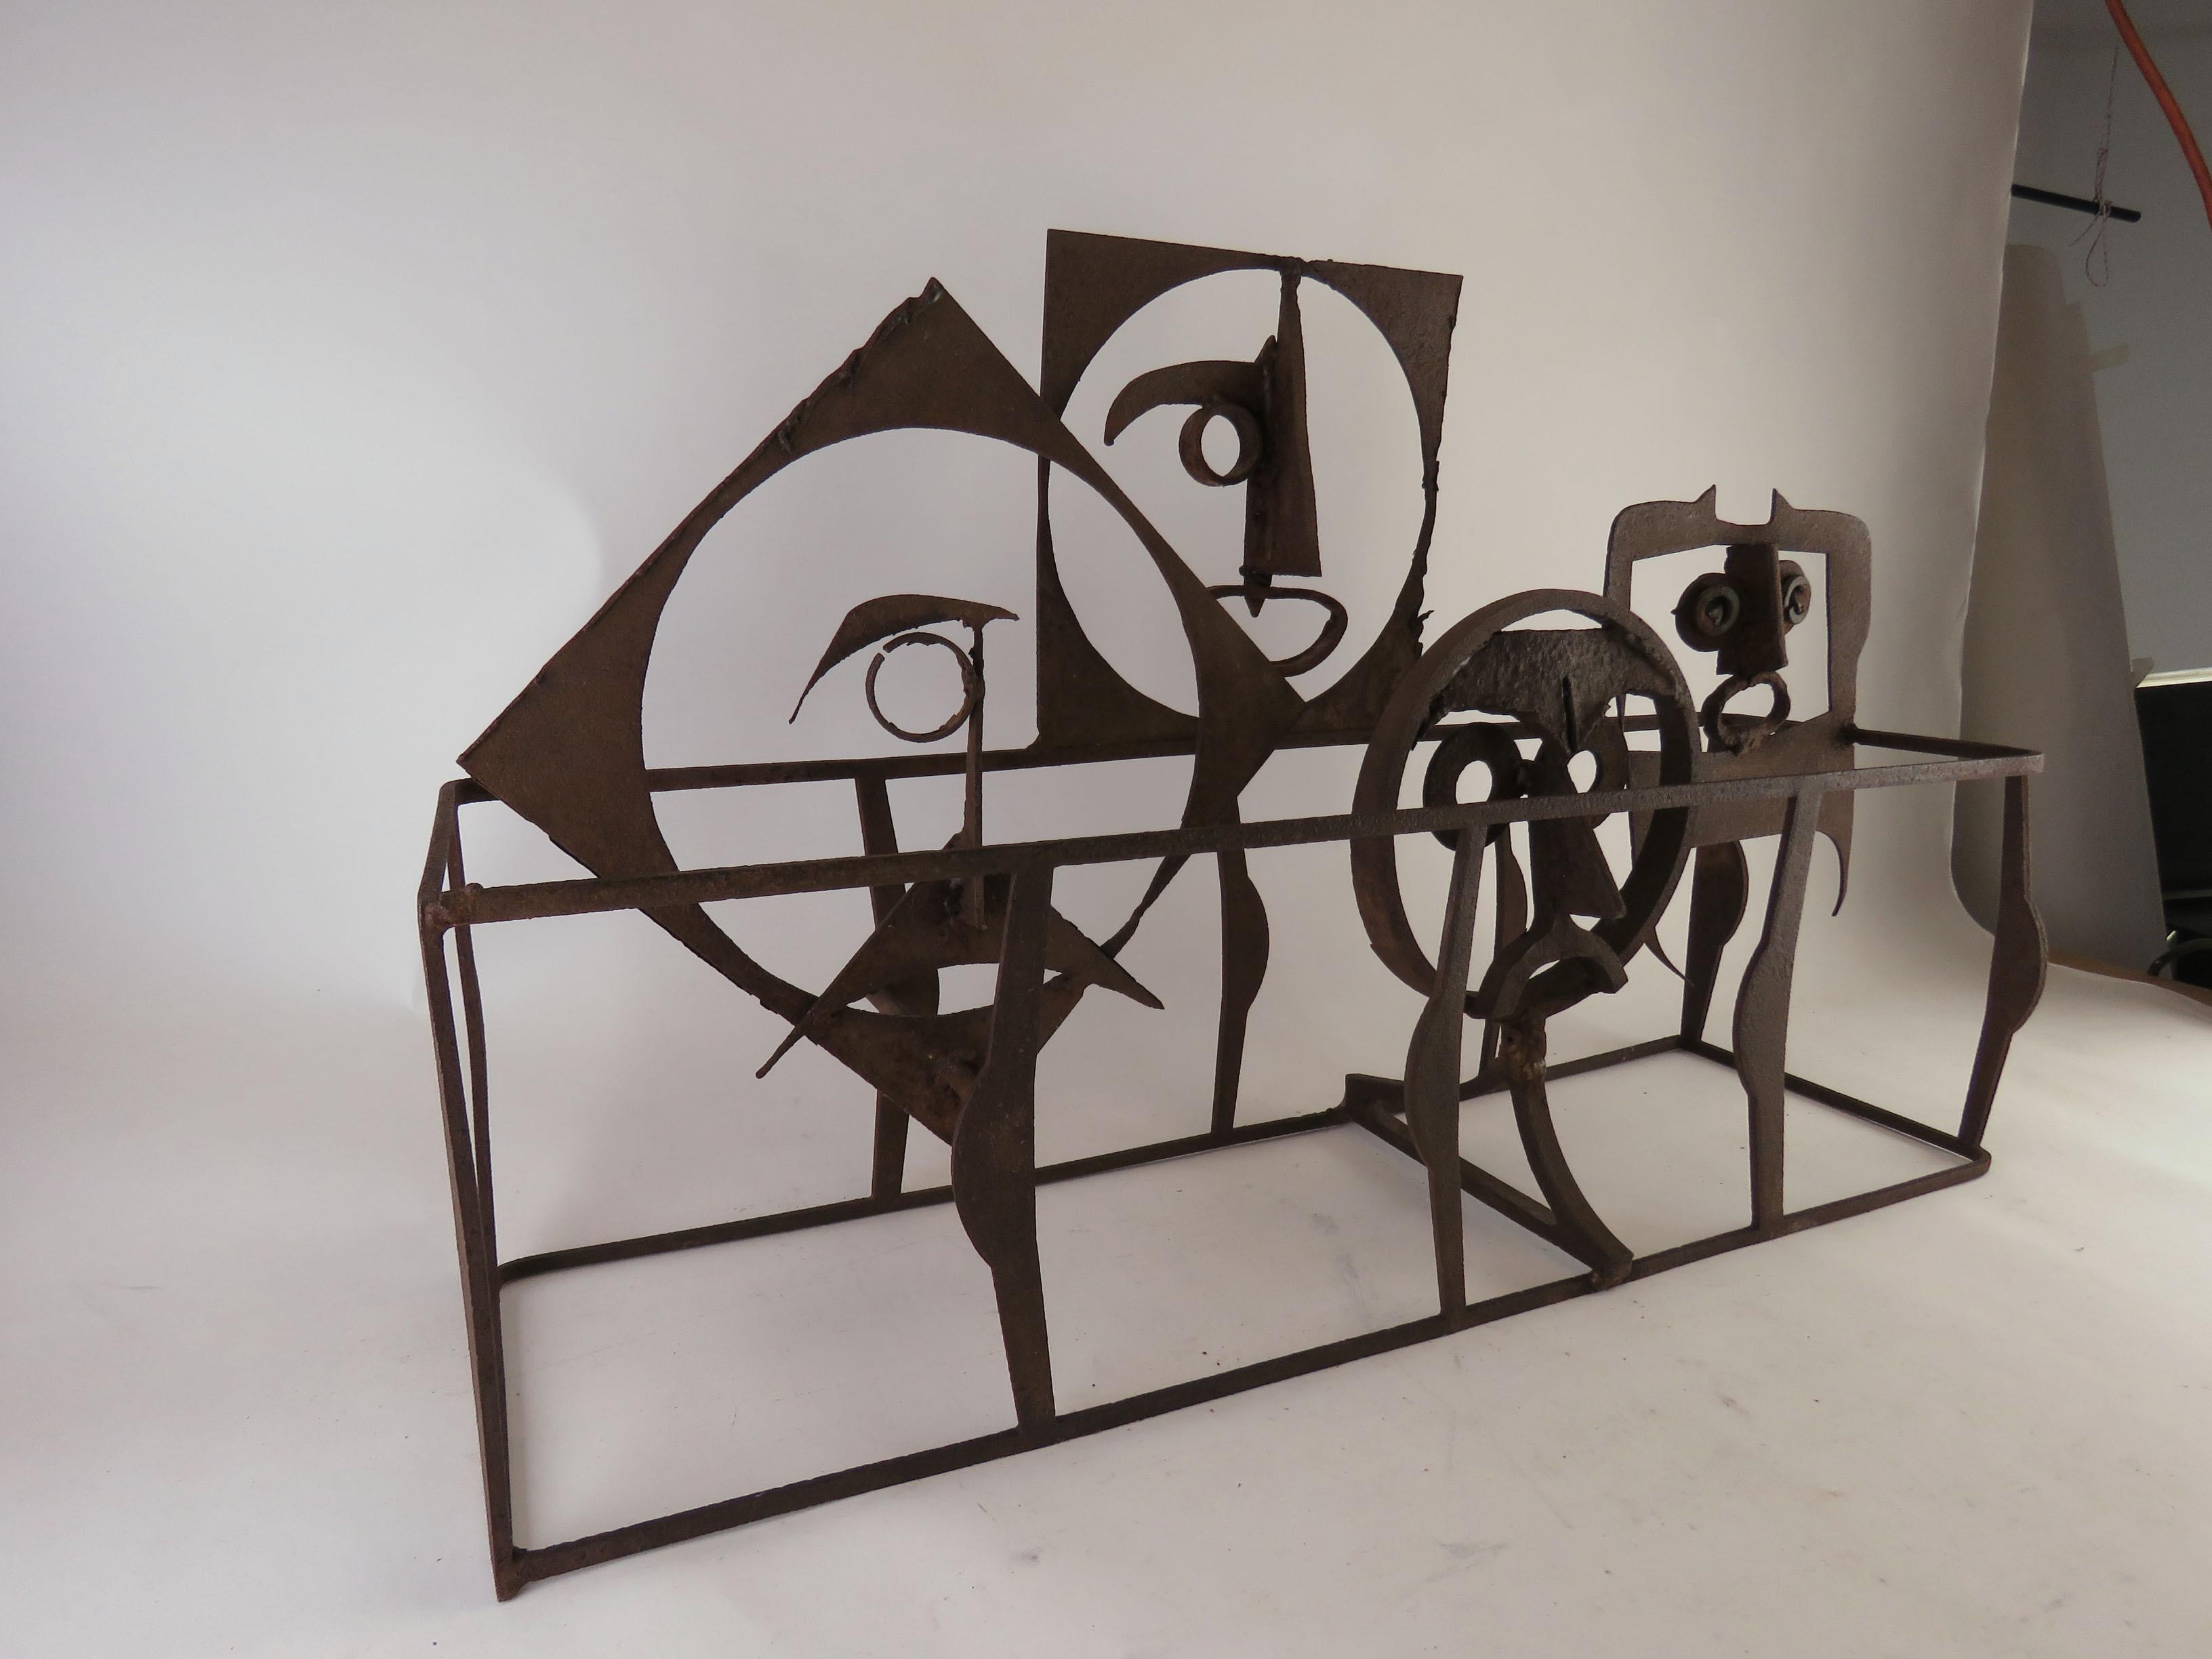 Mid-20th Century Whimsical Steel Sculpture of Pattern Castoffs, circa 1960s